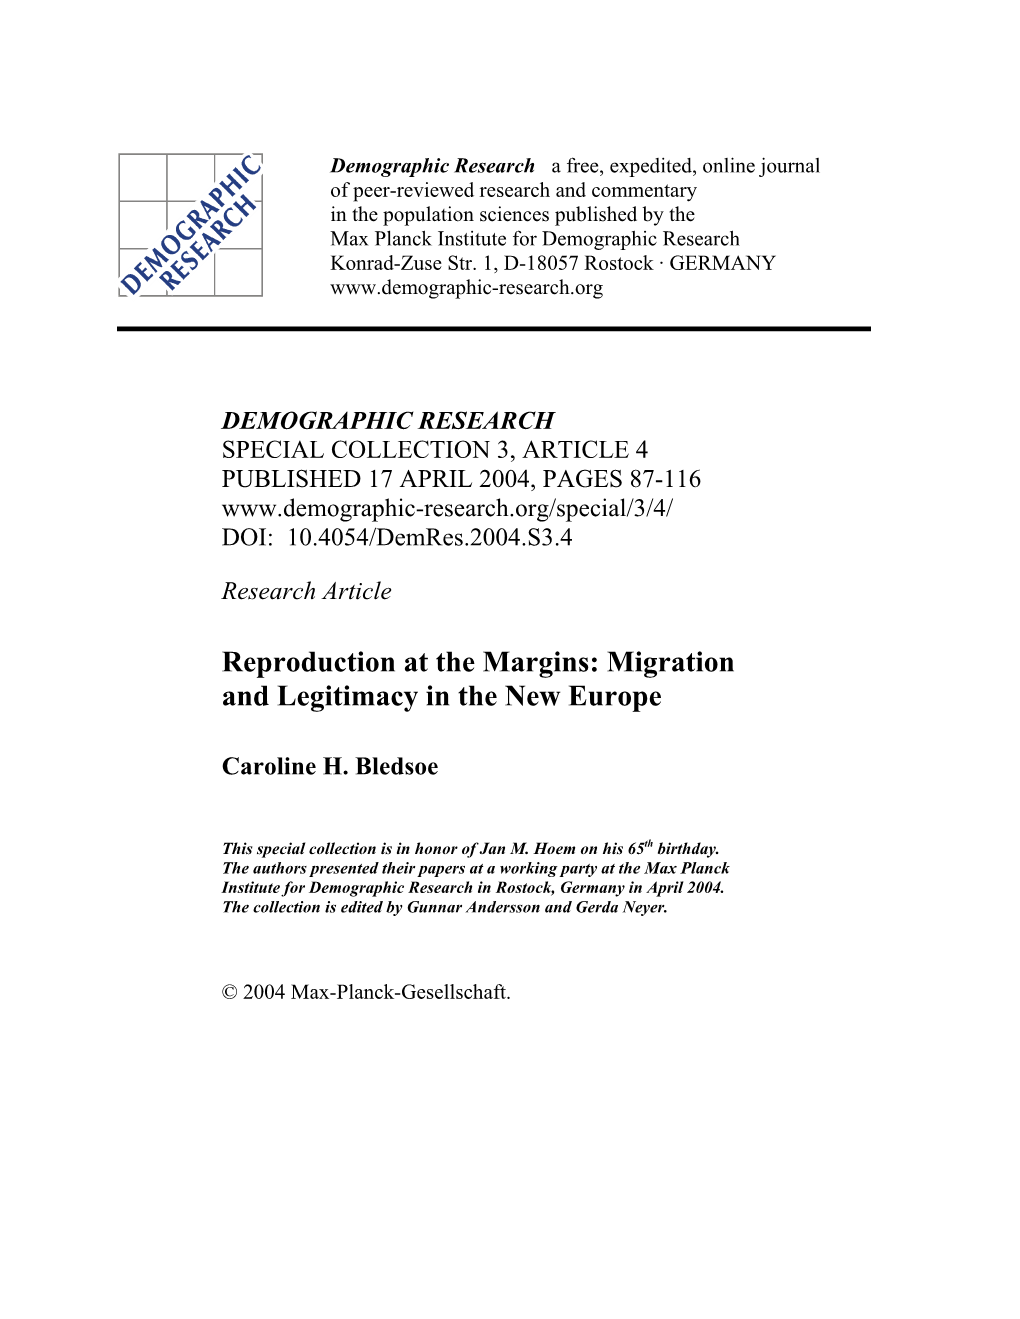 Migration and Legitimacy in the New Europe